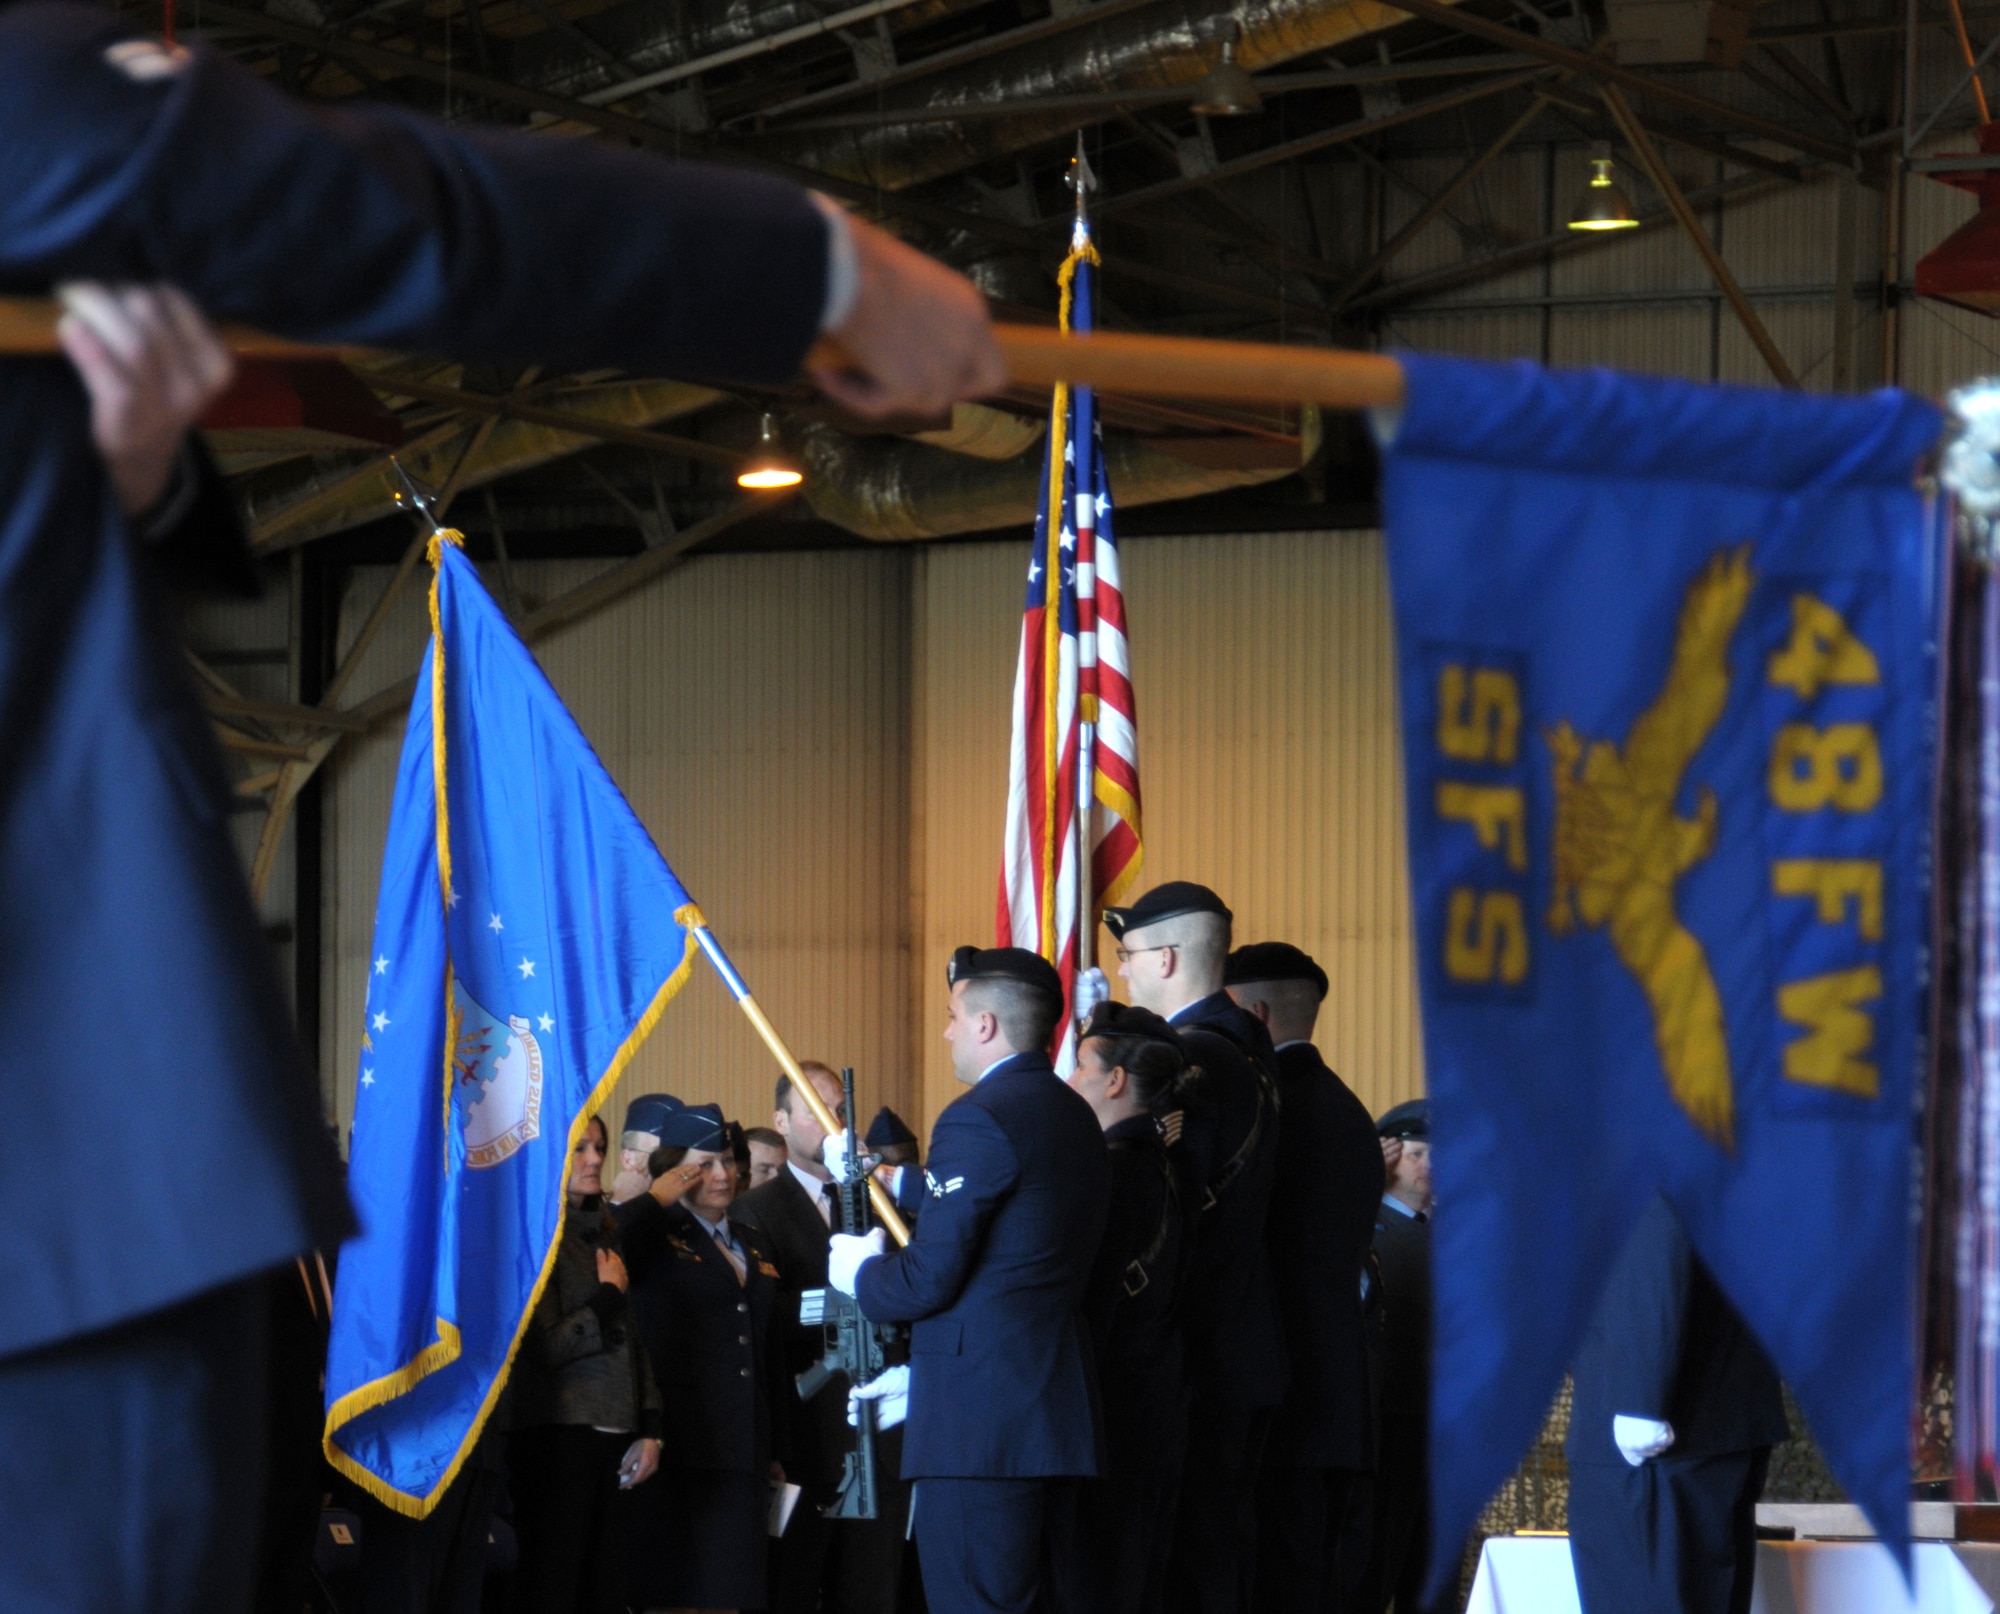 ROYAL AIR FORCE LAKENHEATH, England - A color guard, comprised of Airmen from the 48th Security Forces Squadron, post the colors during a memorial service for Senior Airman Nicholas J. Alden, a security forces journeyman, in Hangar 7 on March 11, 2011. Airman Alden was killed in action during a shooting incident at Frankfurt International Airport, Germany, March 2, 2011.  More than 500 Airmen, family and friends were in attendance. (U.S. Air Force photo/Airman Cory Payne)